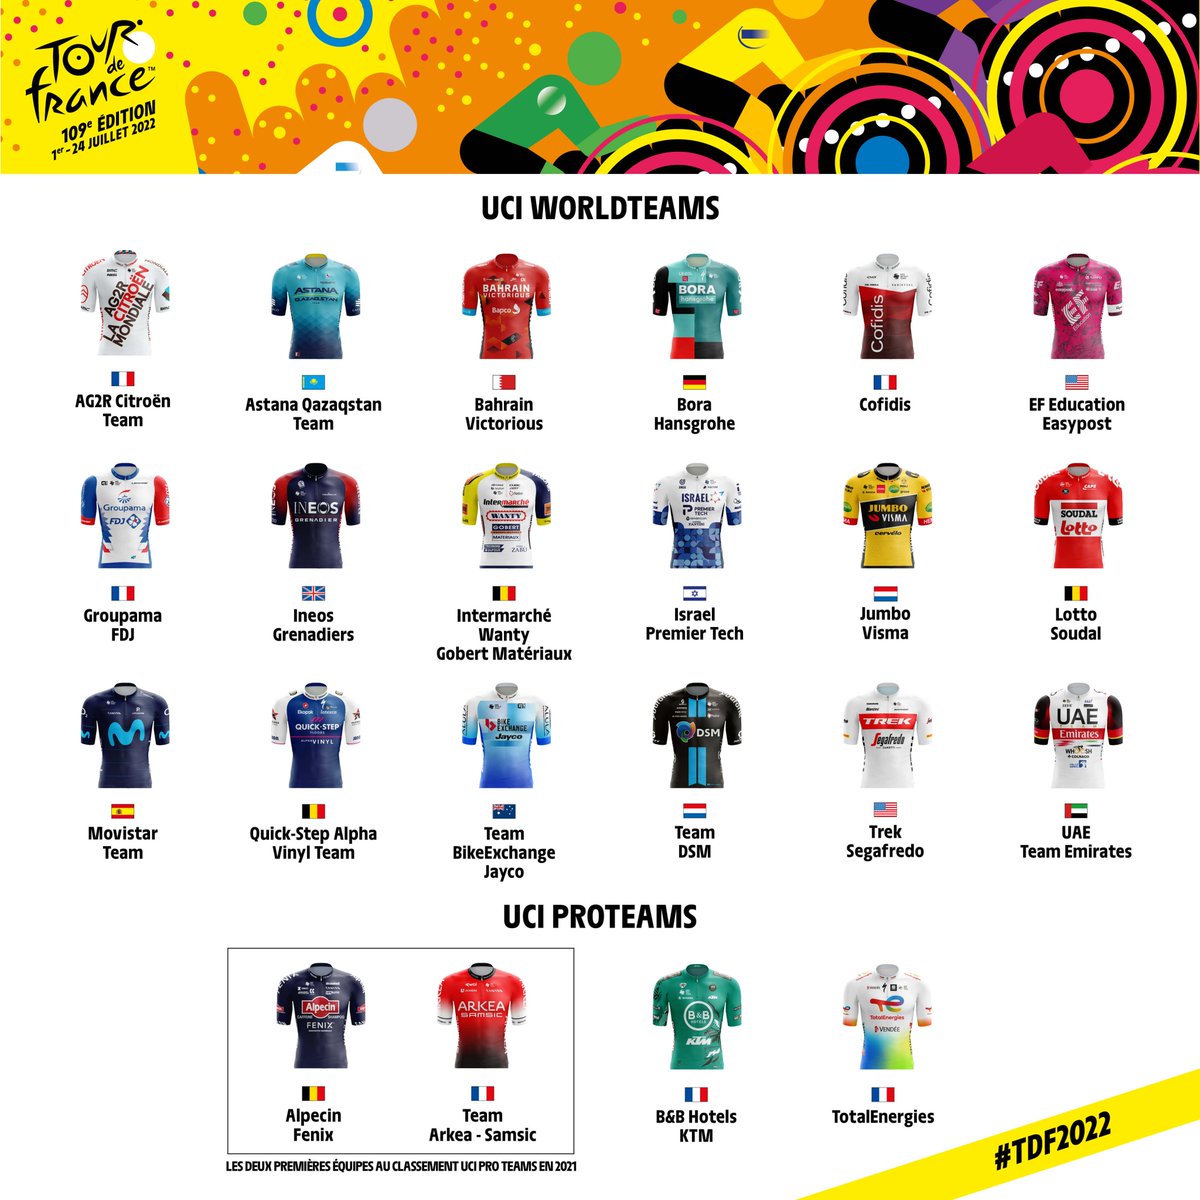 Justerbar Original montering Tour de France™ on Twitter: "💛 #TDF2022 team selection 💛 ✓ The 18 UCI  WorldTeams ✓ 🇧🇪@AlpecinFenix and 🇫🇷@Arkea_Samsic, 1st and 2nd placed  UCI ProTeams in 2021 ✓ 🇫🇷@BBHOTELS_KTM and 🇫🇷@TeamTotalEnrg, invited